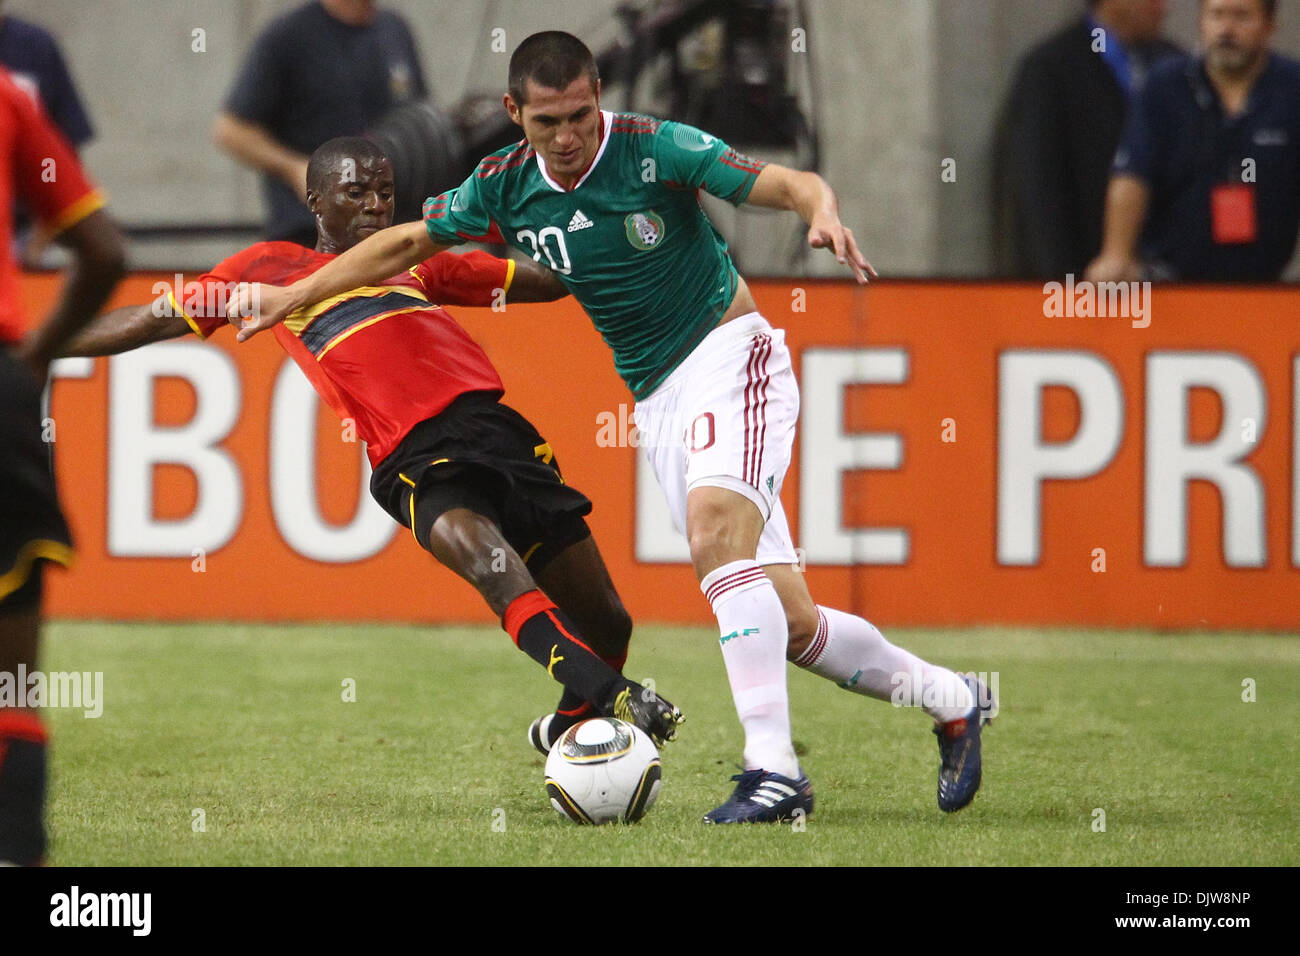 Jorge Torres Nilo (#20) Defender for Mexico pushes Gomito (#3) Defender for Angola off the ball deep in Angola territory.  Mexico defeated Angola 1-0 at Reliant Stadium in Houston, TX. (Credit Image: © Anthony Vasser/Southcreek Global/ZUMApress.com) Stock Photo